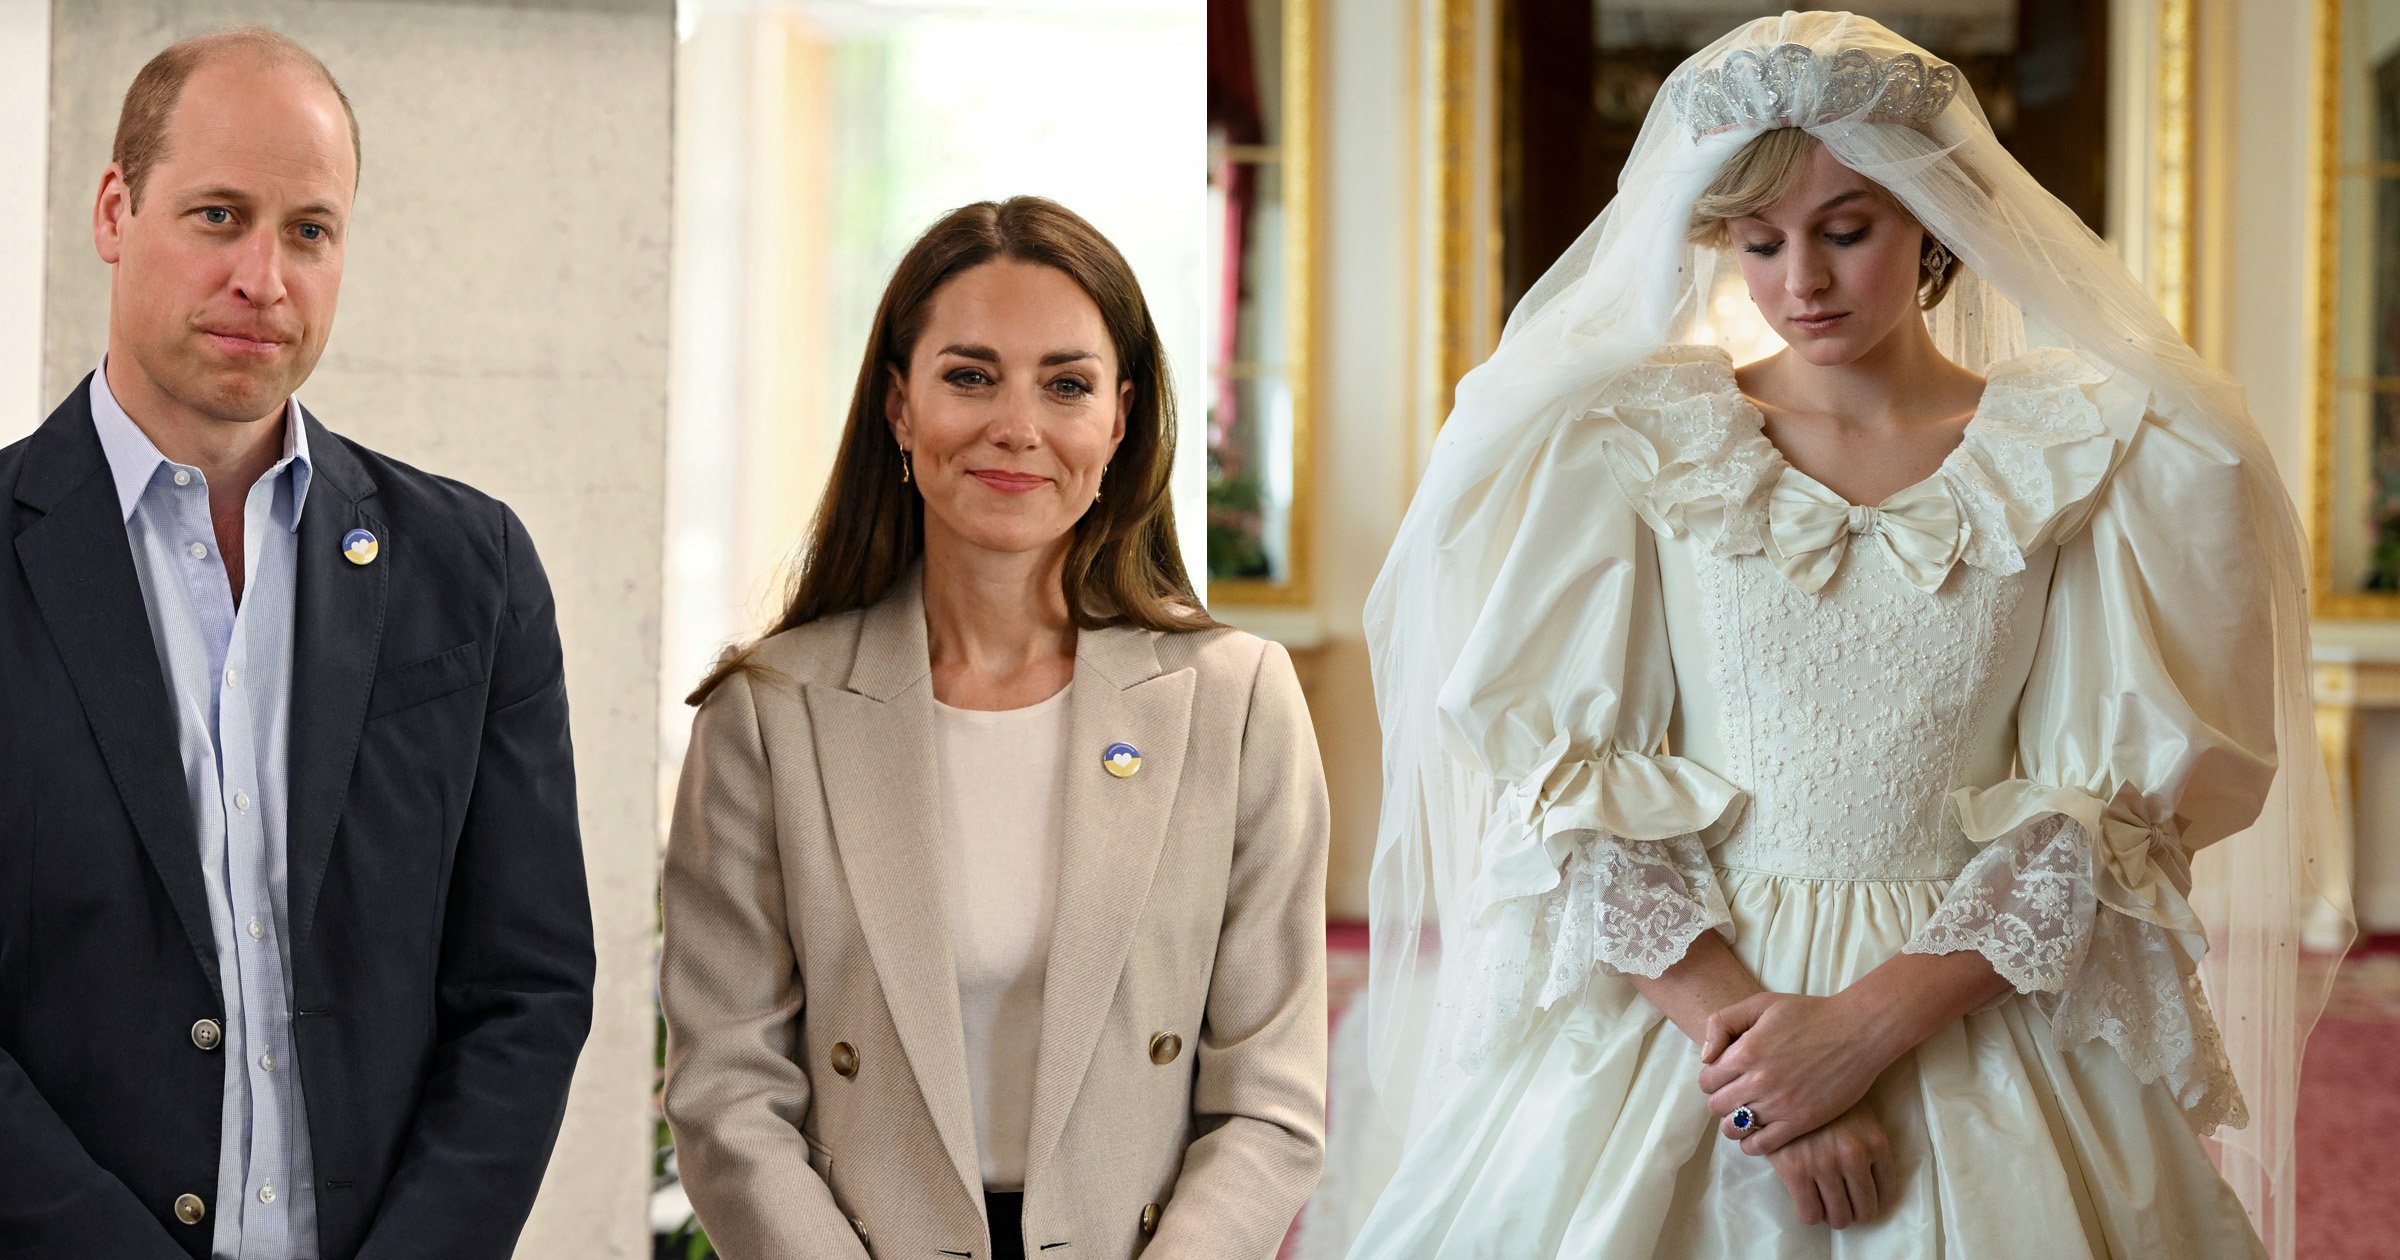 The Crown finally casts newcomers to play young Kate Middleton and Prince William for season 6